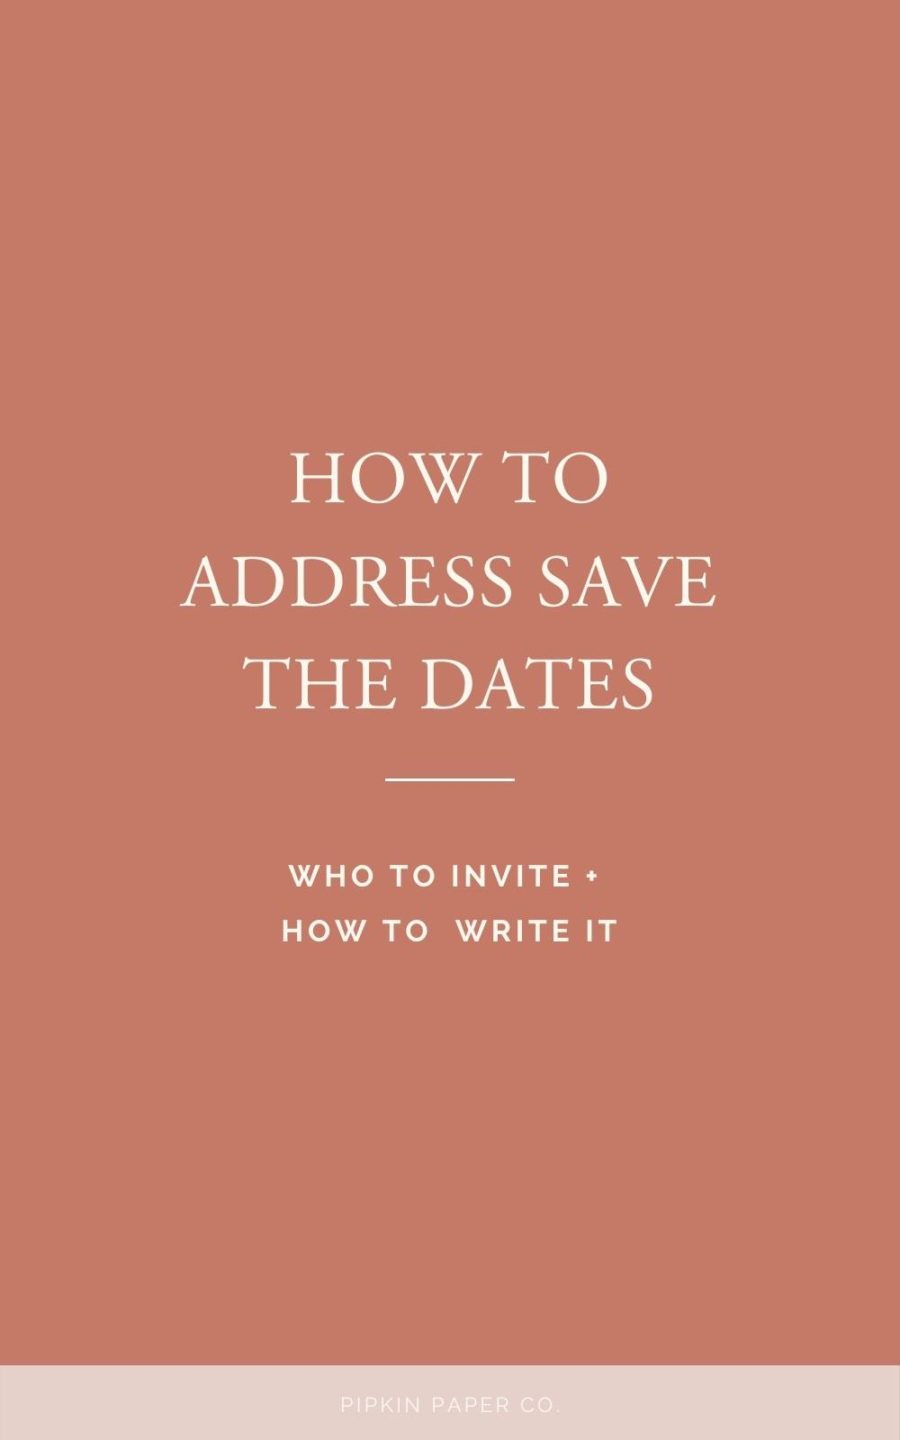 How to Address Save the Dates